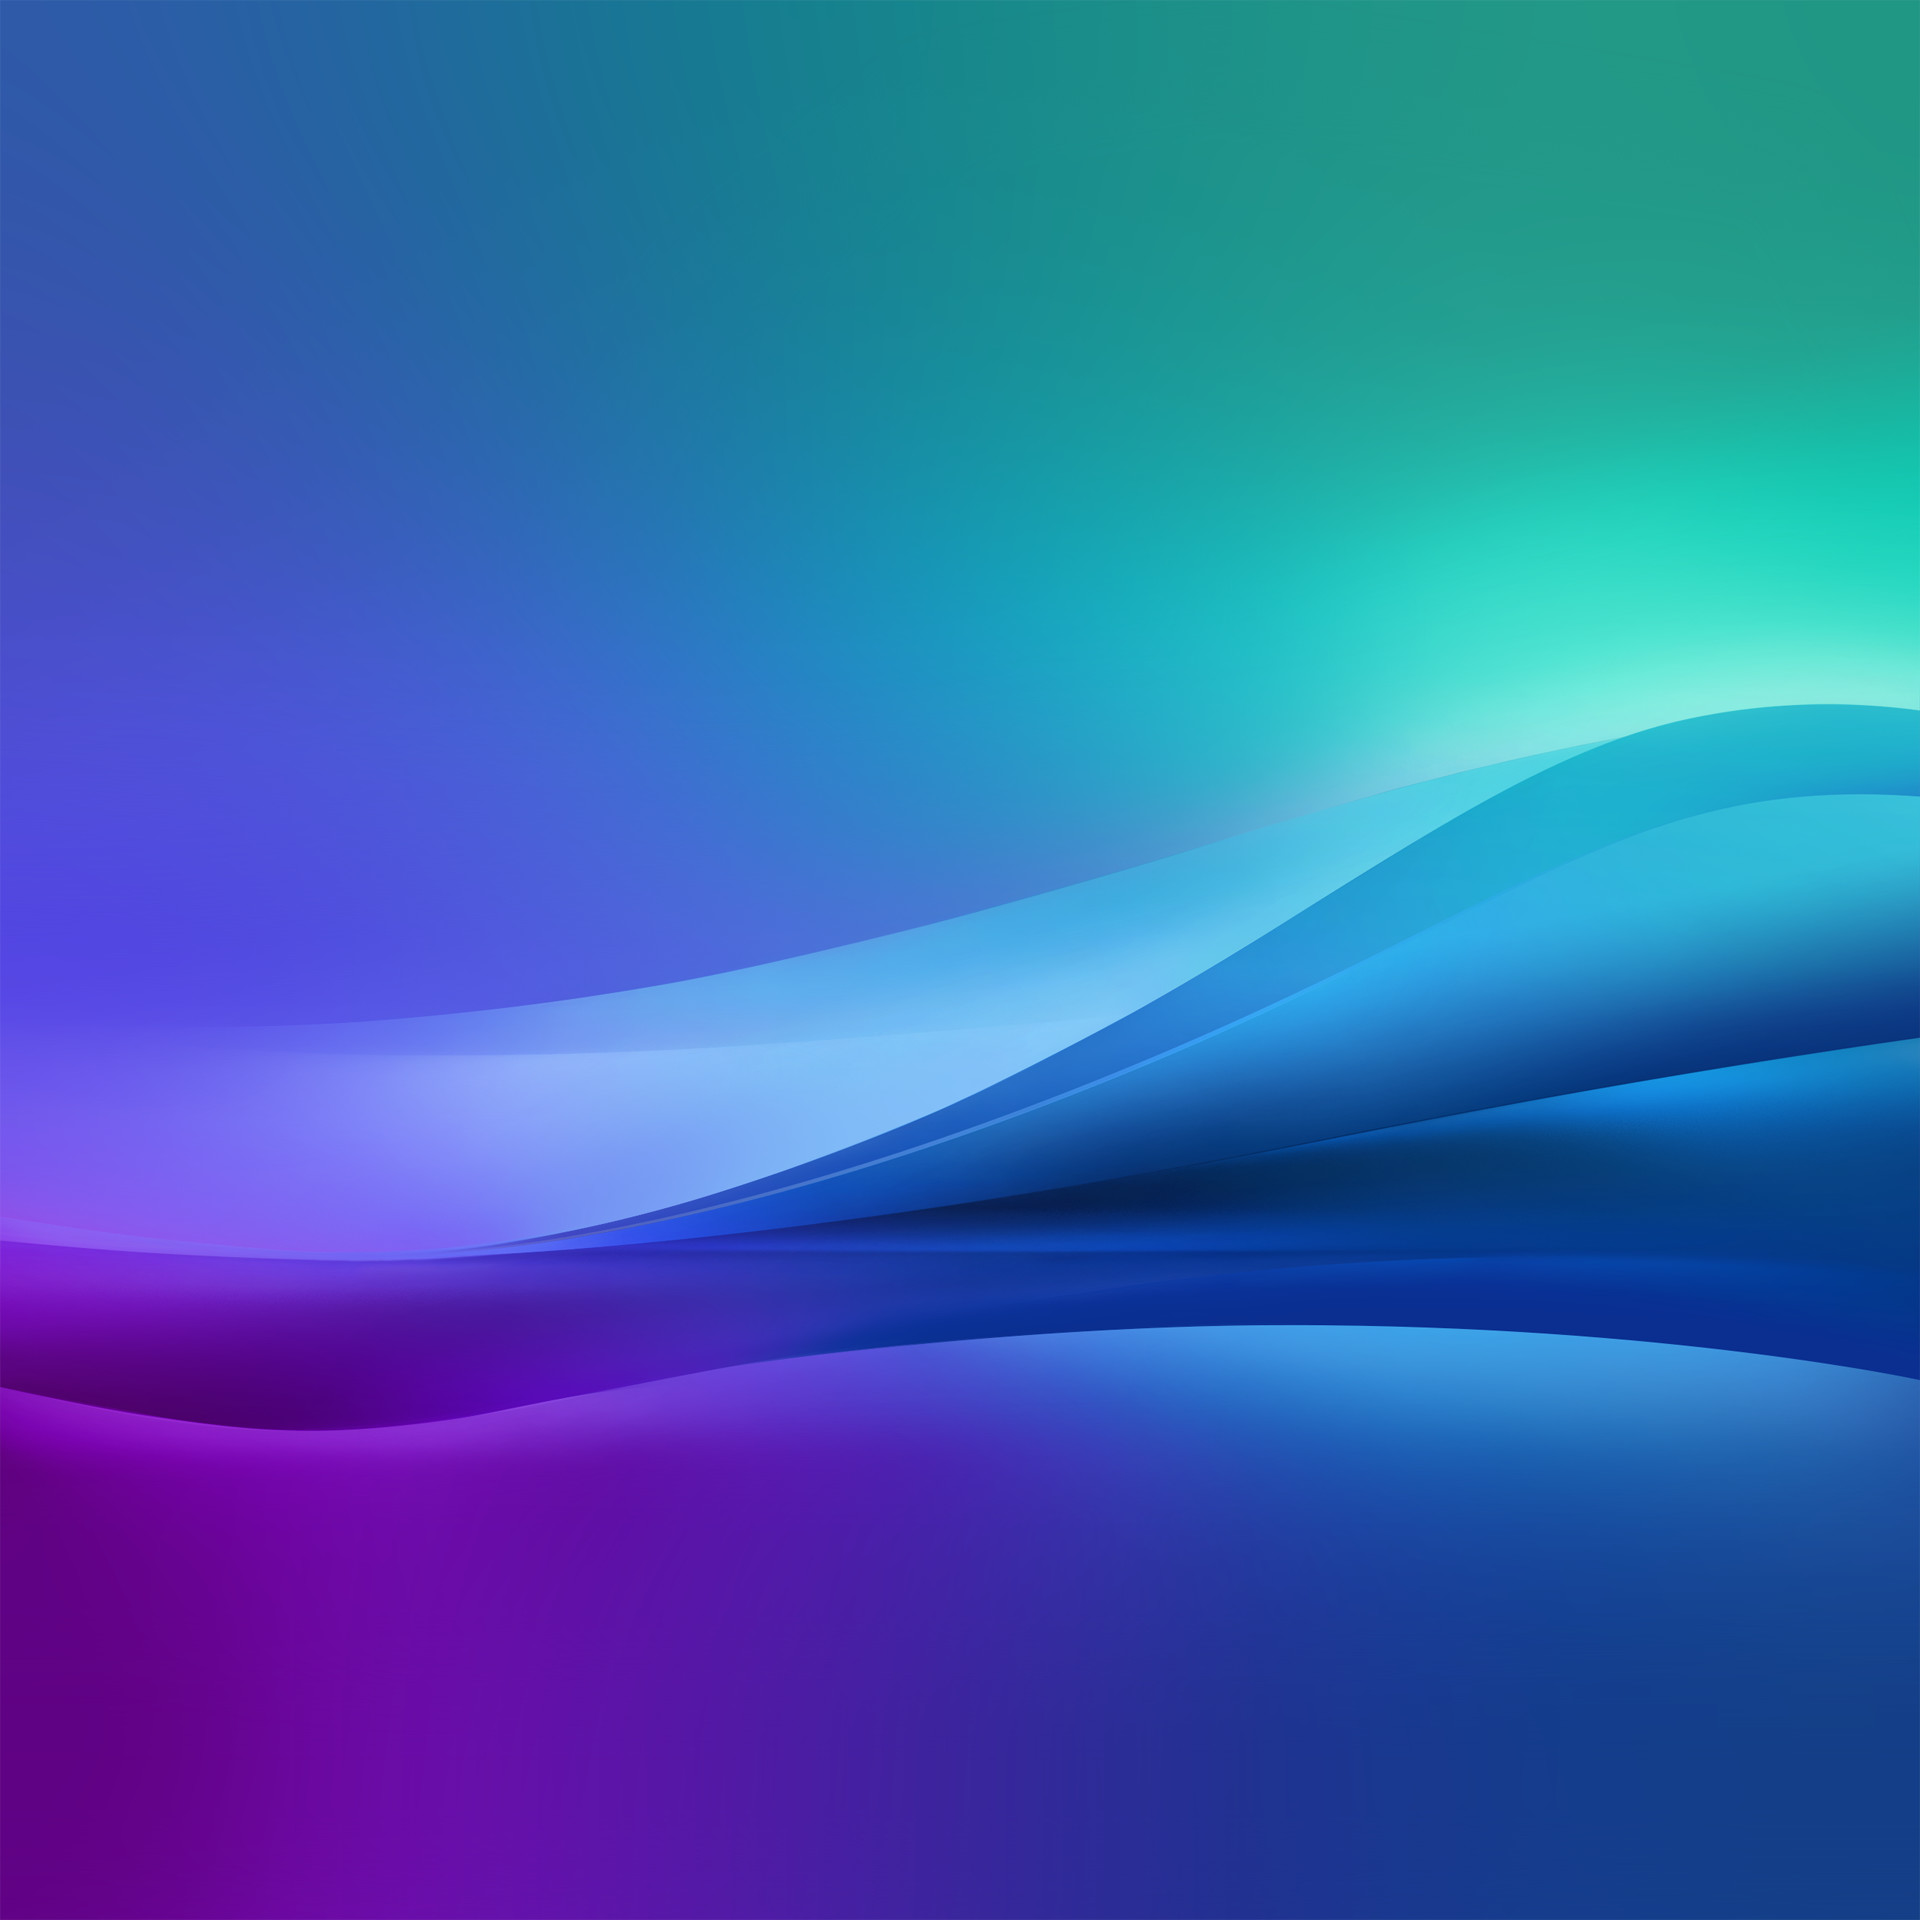 Galaxy Tab S2 Wallpapers 67 Images